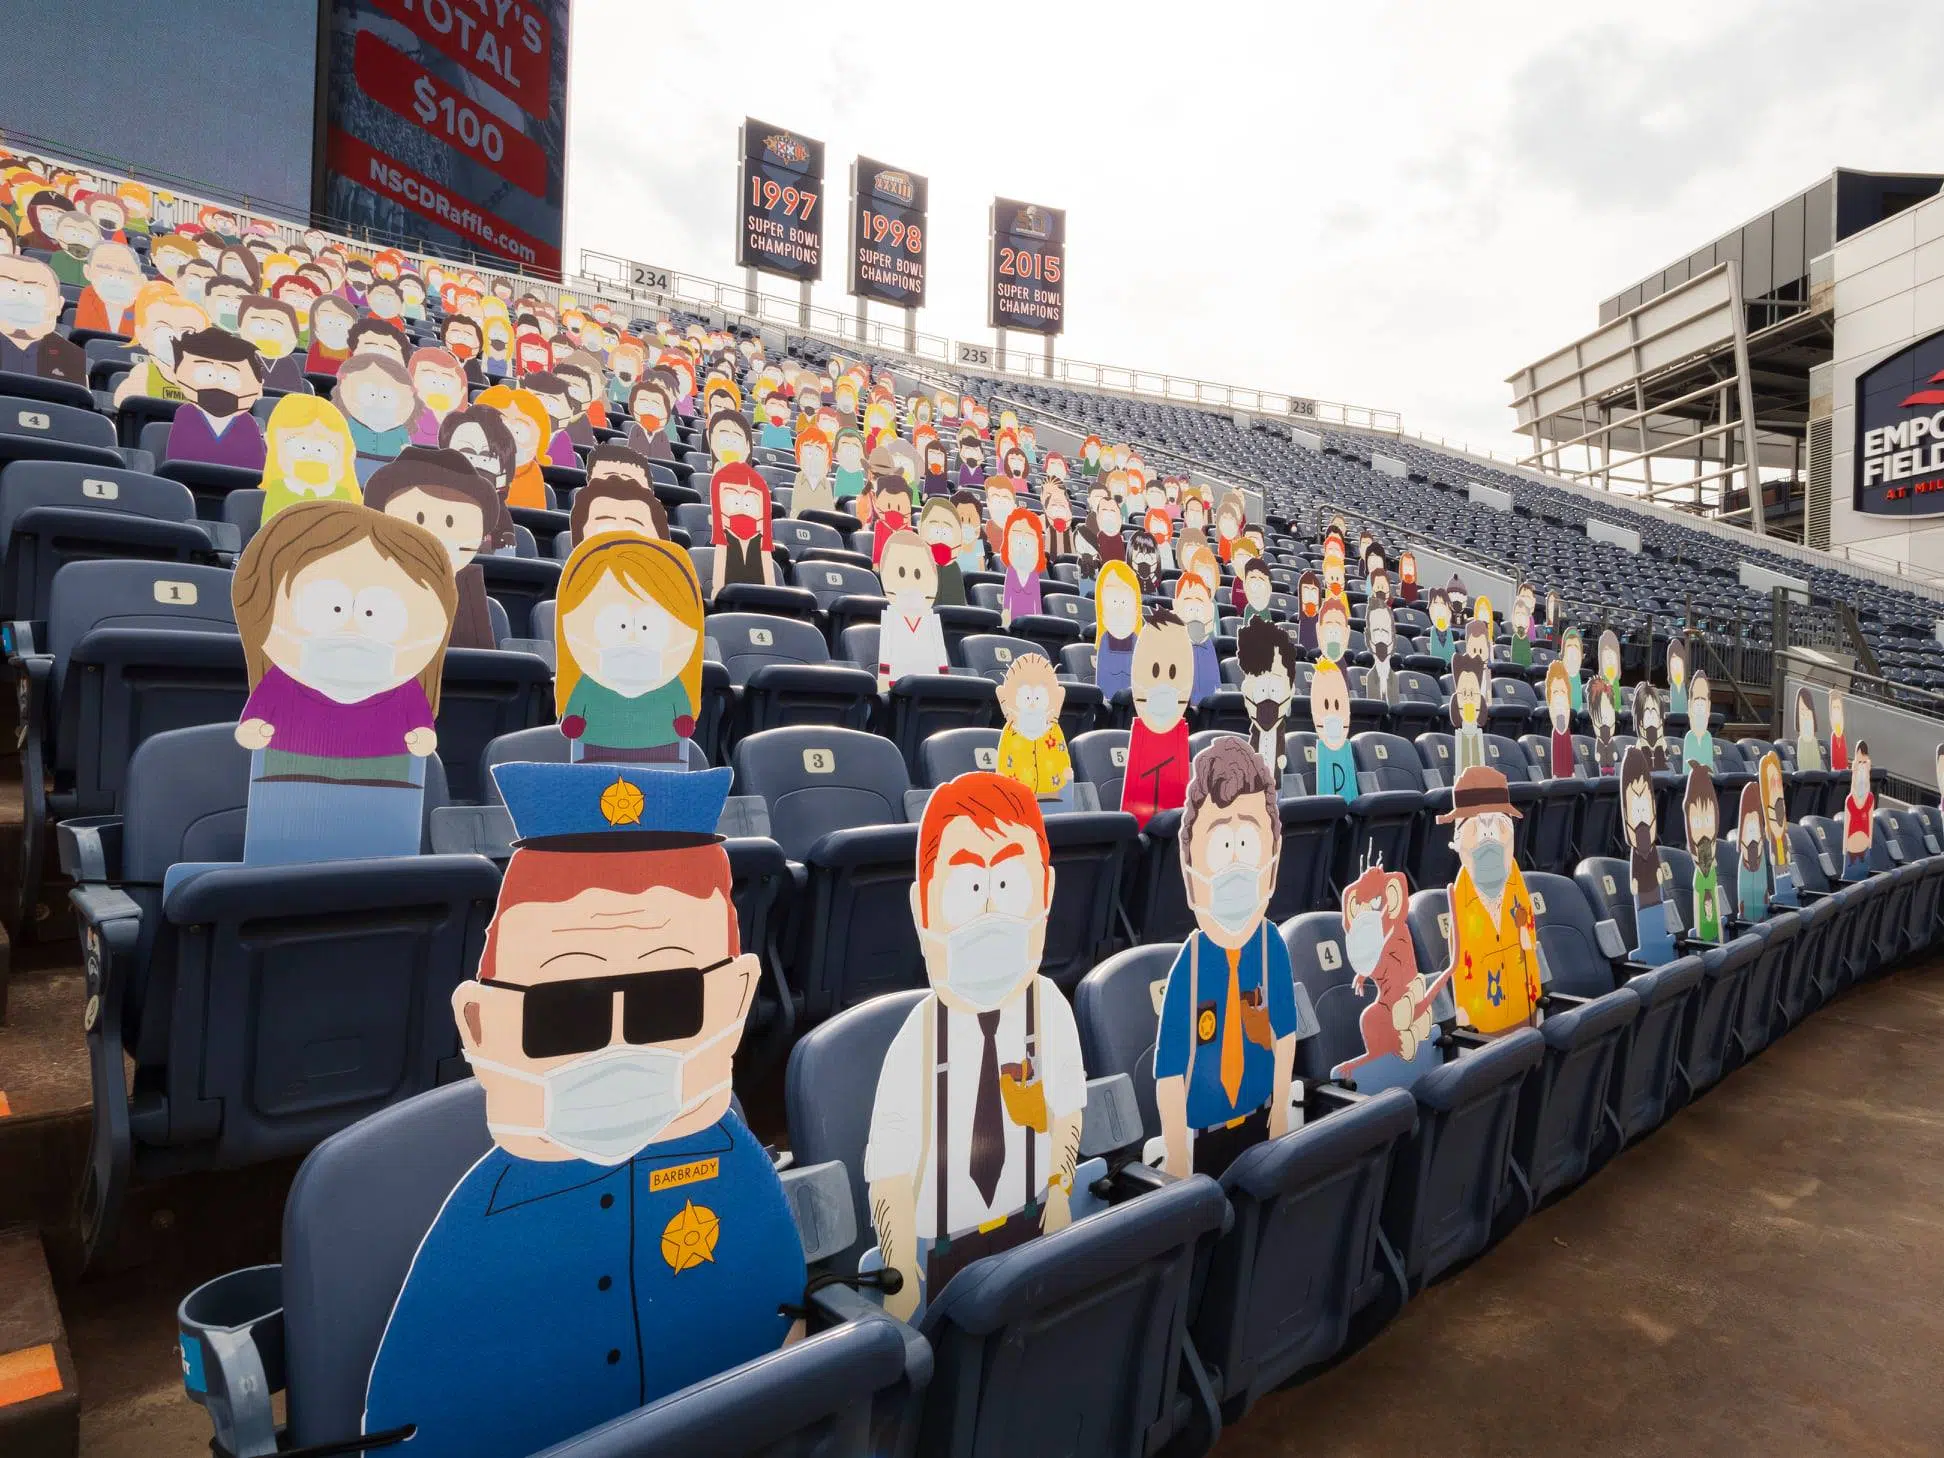 South Park Characters Attend NFL Game In Denver